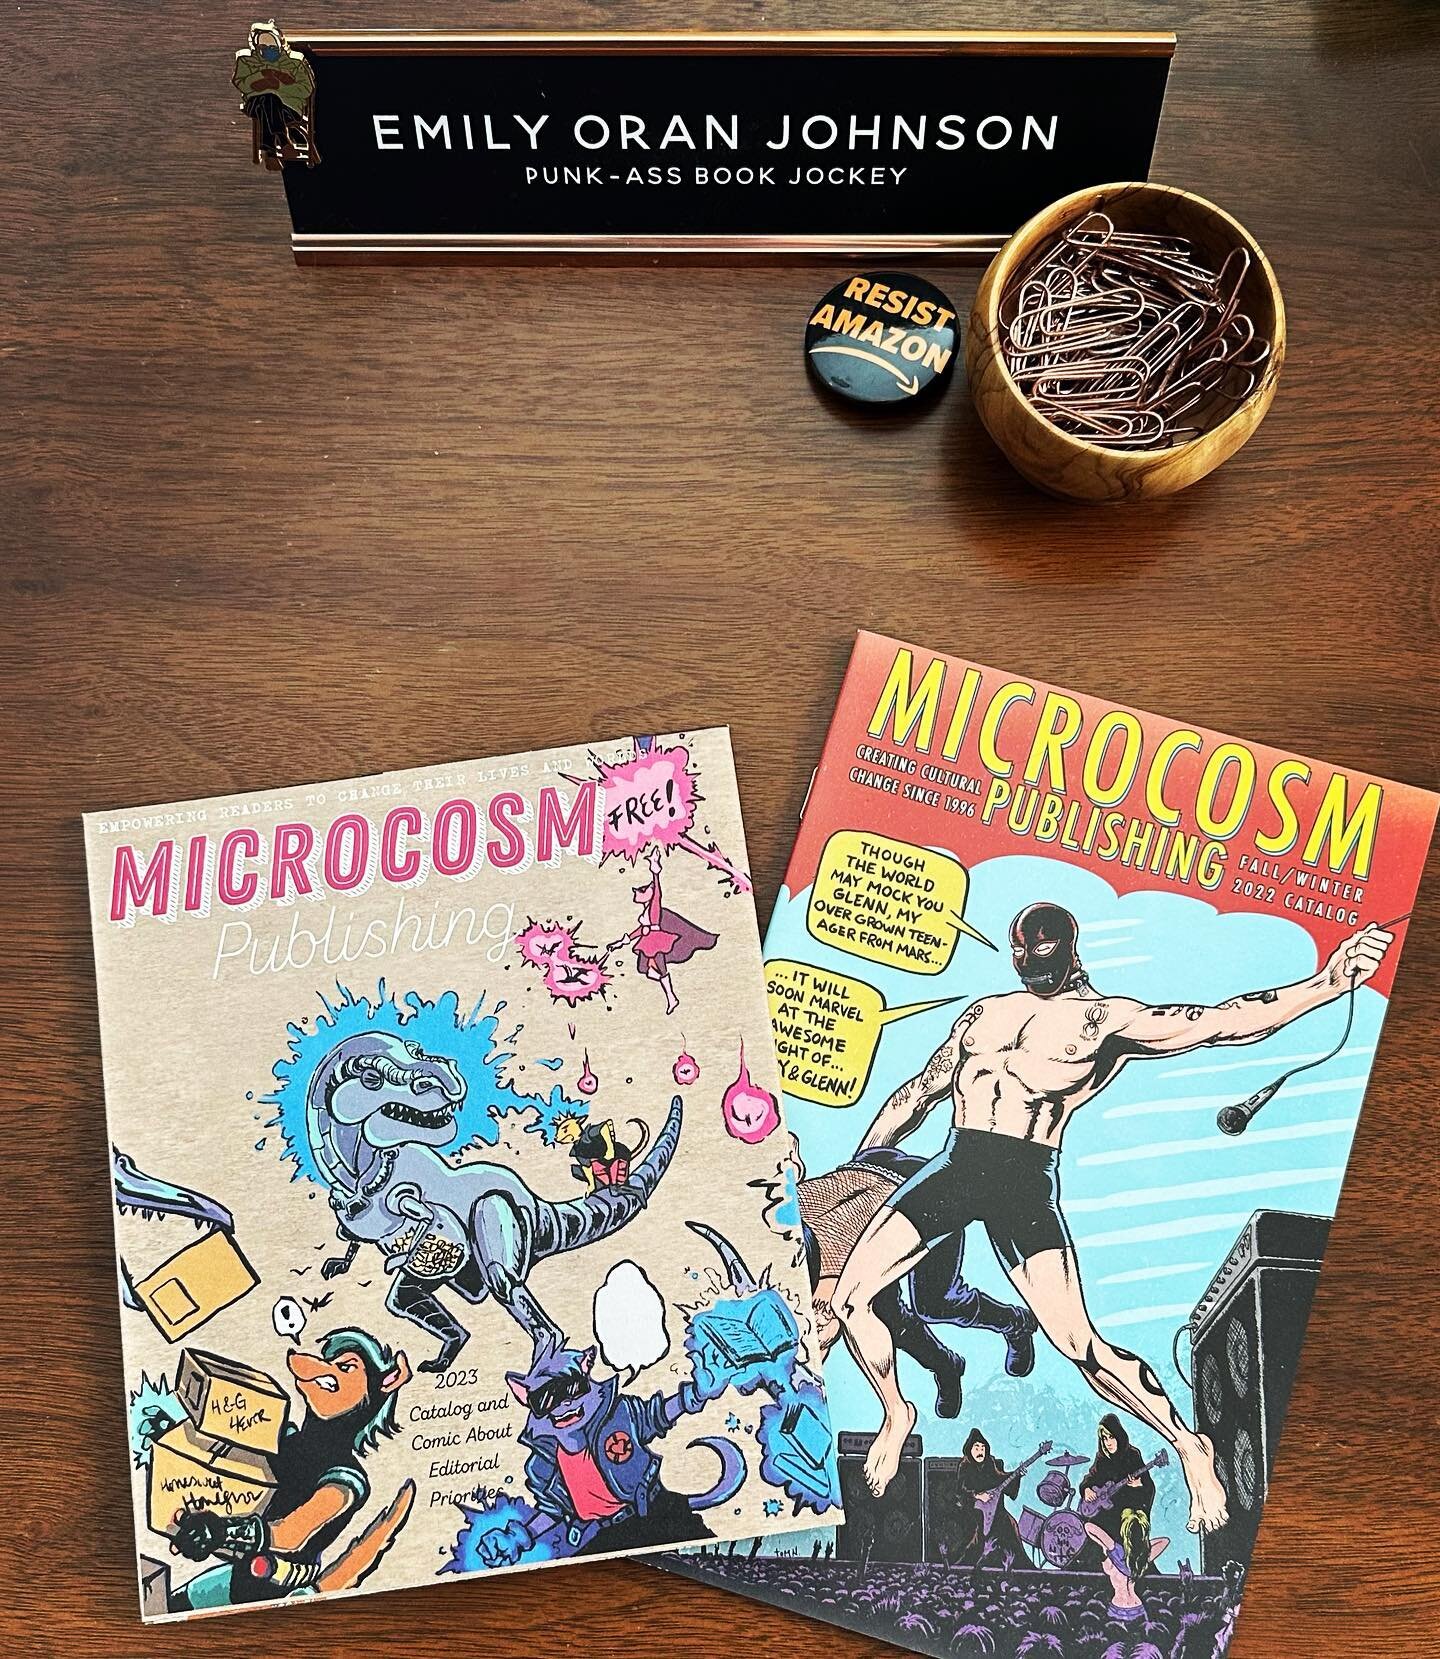 More Spring things we&rsquo;re excited about: Microcosm! This is still our first season as their reps, and we couldn&rsquo;t be more thrilled. We&rsquo;ve been ordering up a lot of recent releases for ourselves, to get better acquainted with the list